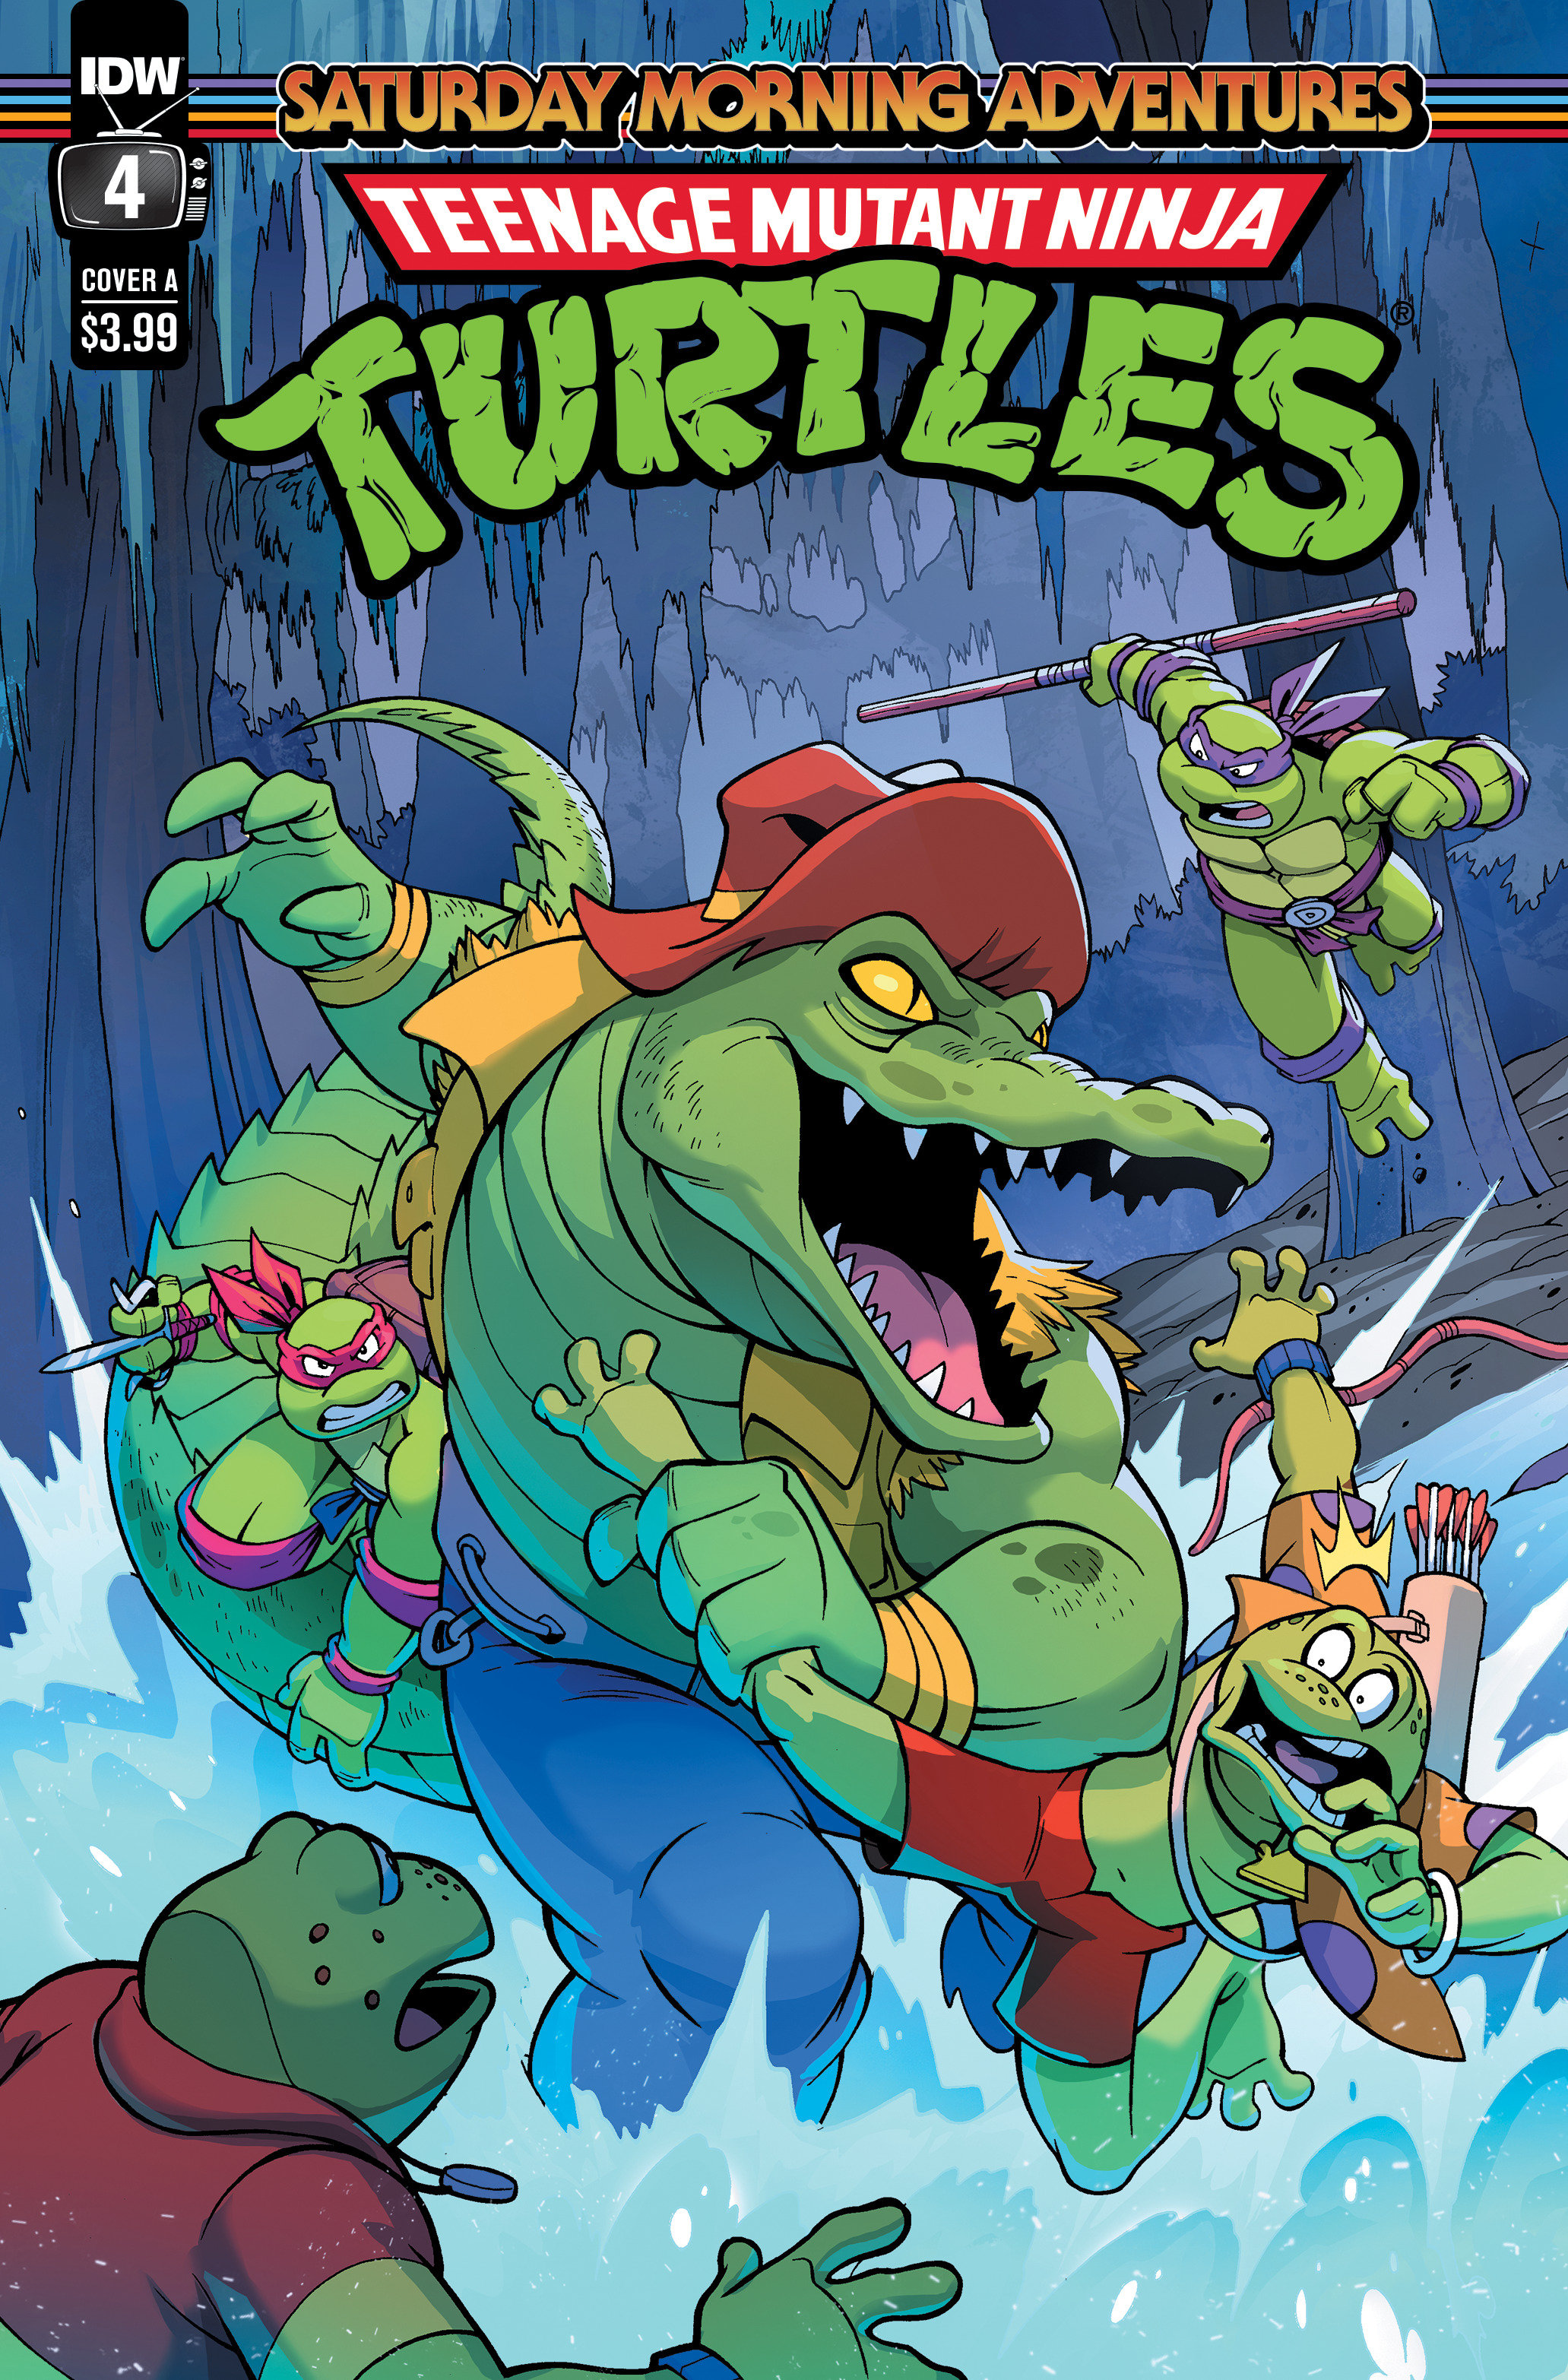 Teenage Mutant Ninja Turtles Saturday Morning Adventures Continued! #4 Cover A Lawrence